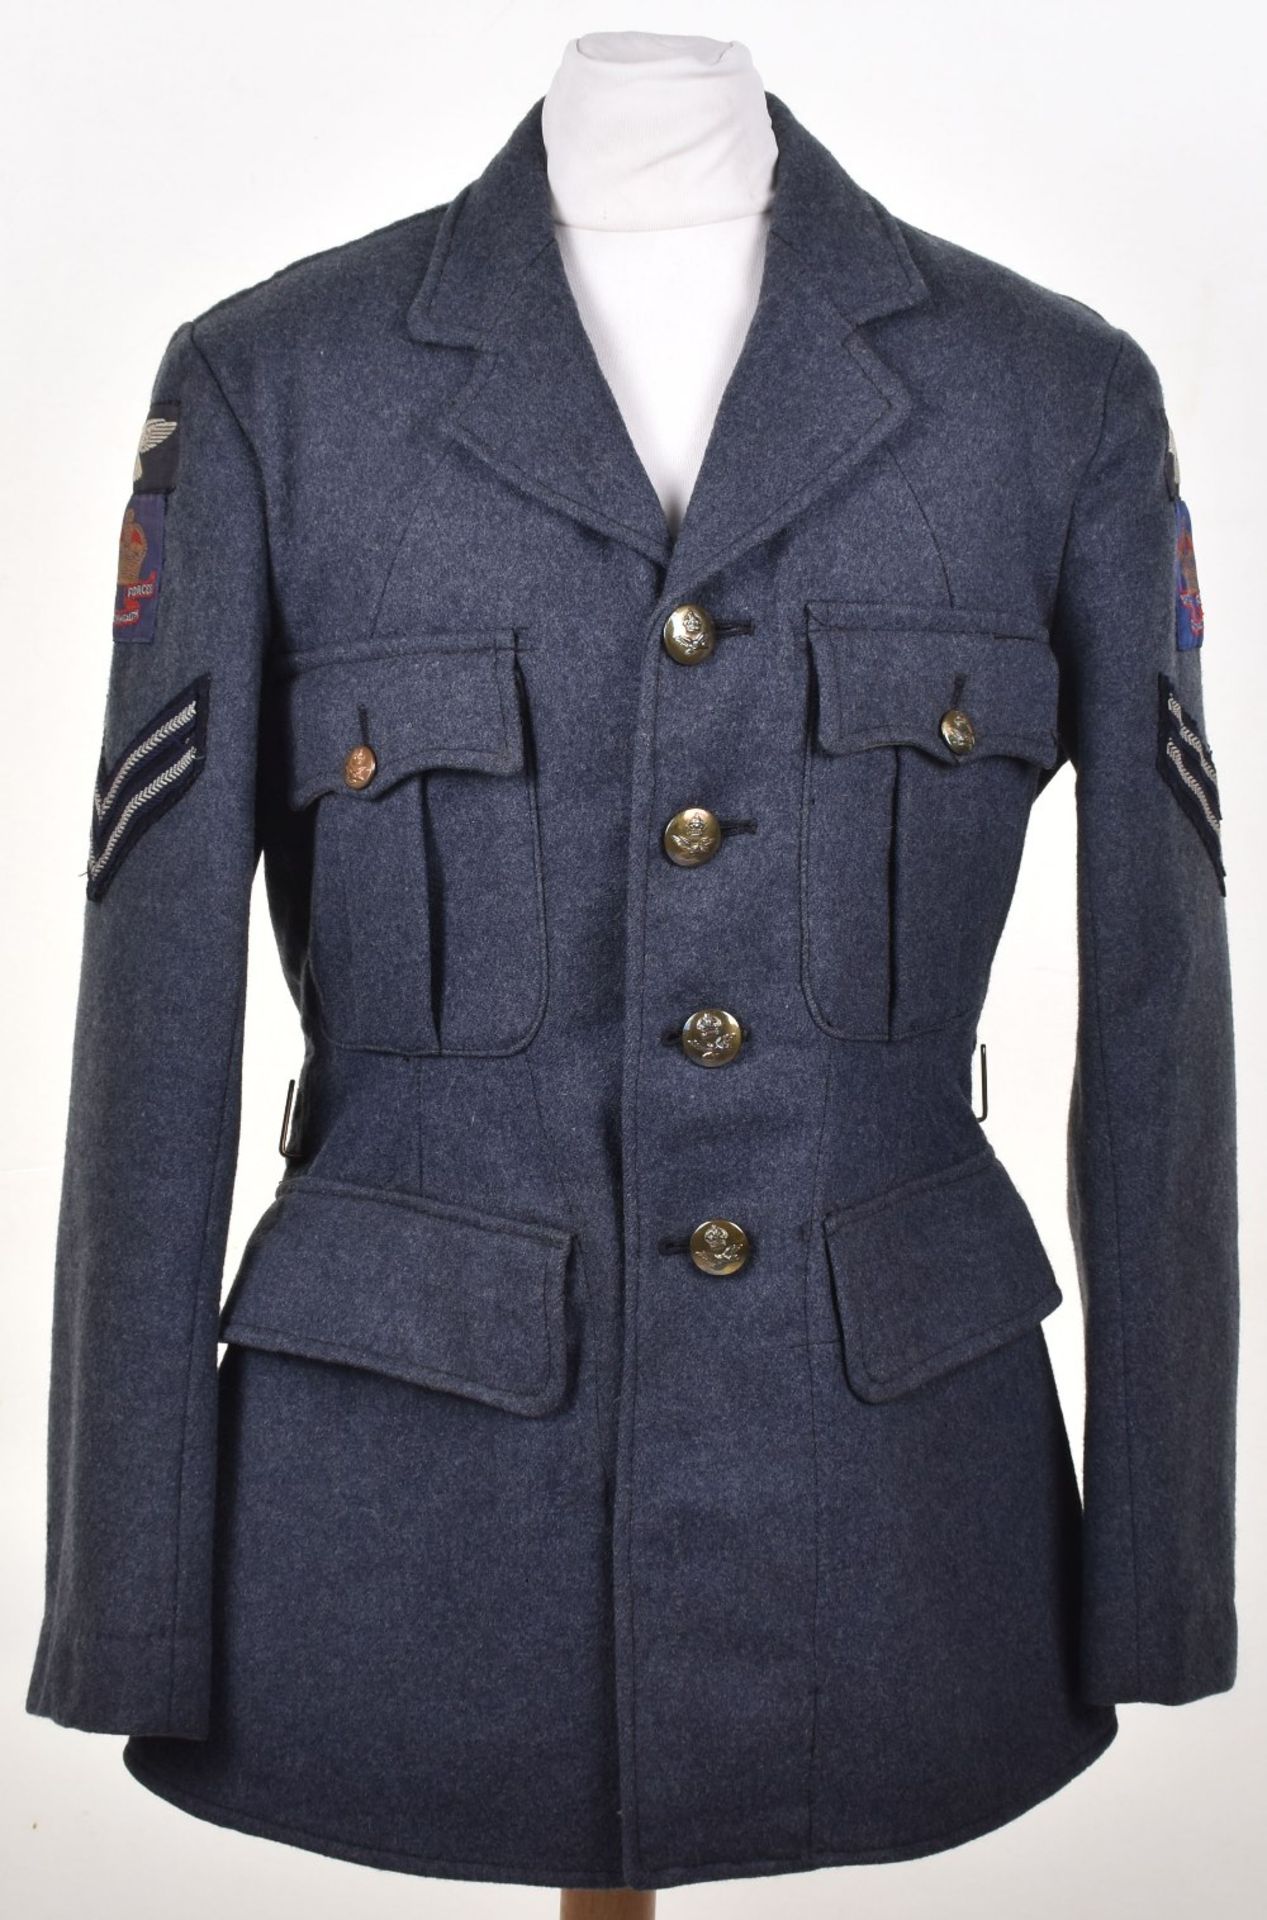 Scarce Royal Air Force Other Ranks Tunic with Insignia for British Commonwealth Occupation Force Jap - Image 10 of 10